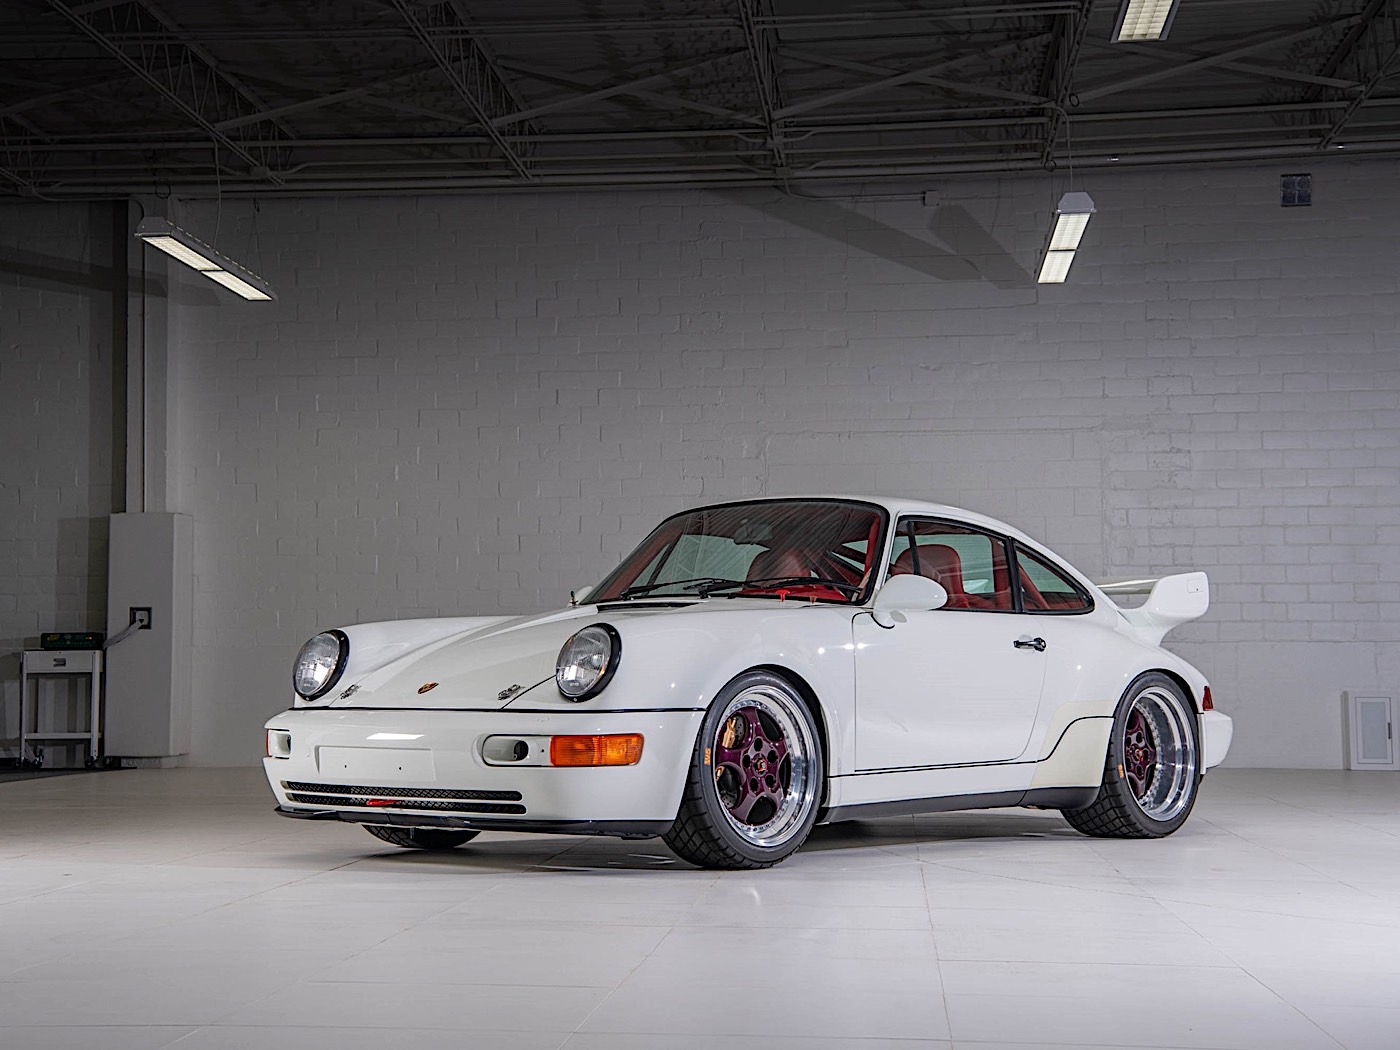 1993 Porsche 911 Carrera 3.8 RSR Is So Rare It’ll Make Your Eyes Water